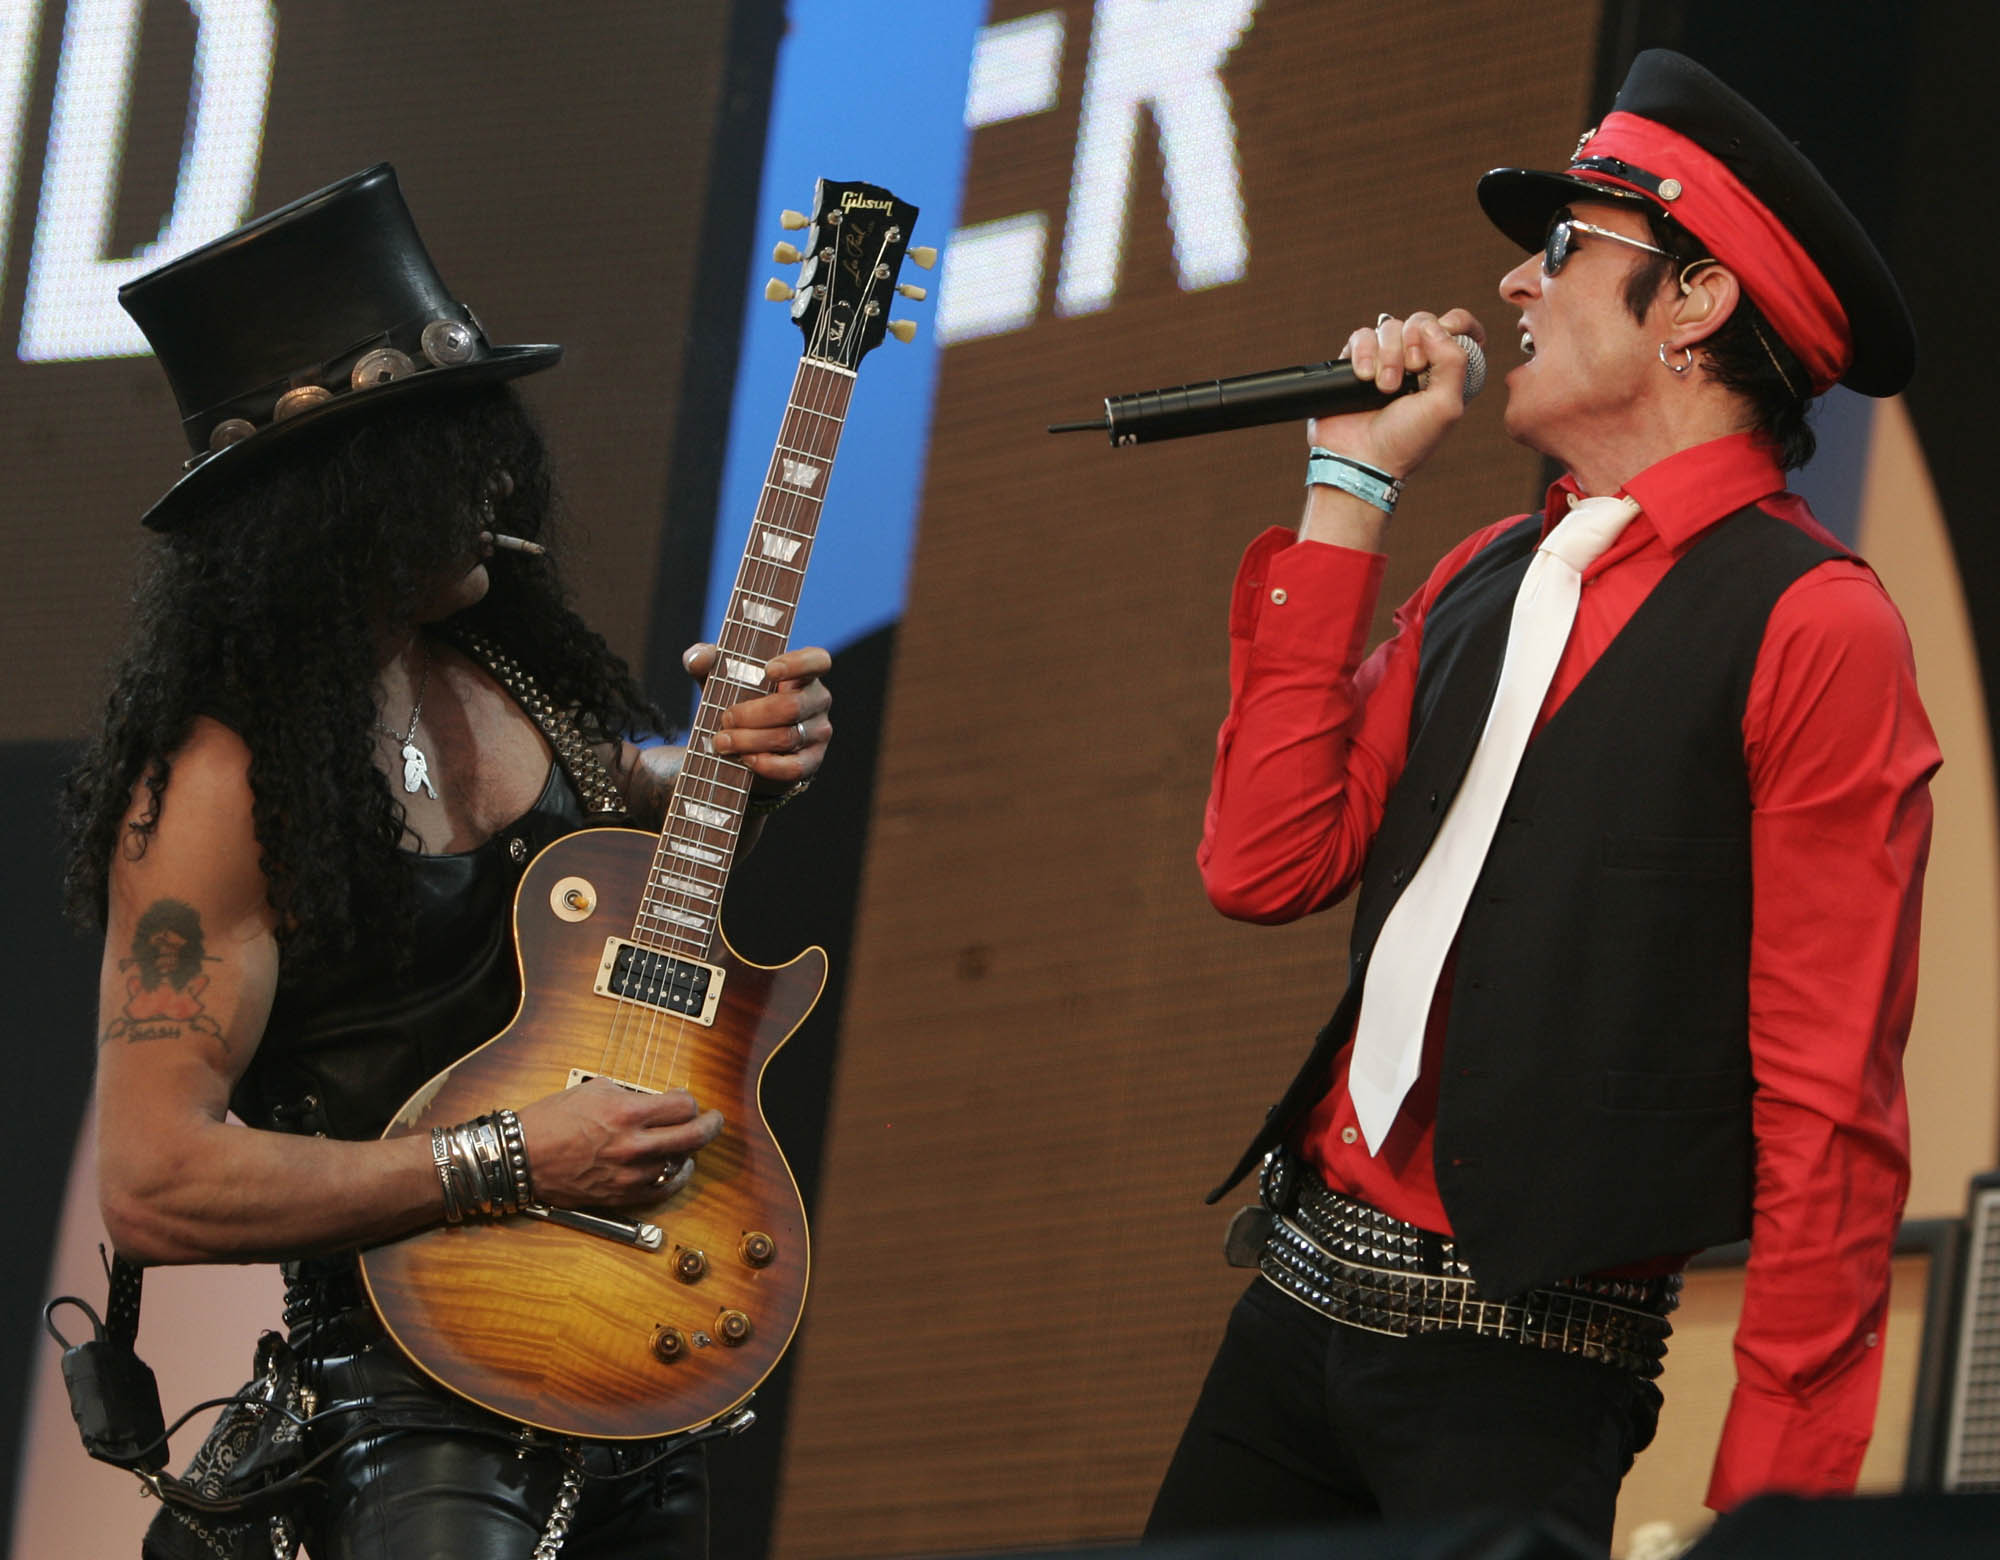 Scott Weiland, frontman of Stone Temple Pilots, Velvet Revolver, remembered in photos, videos